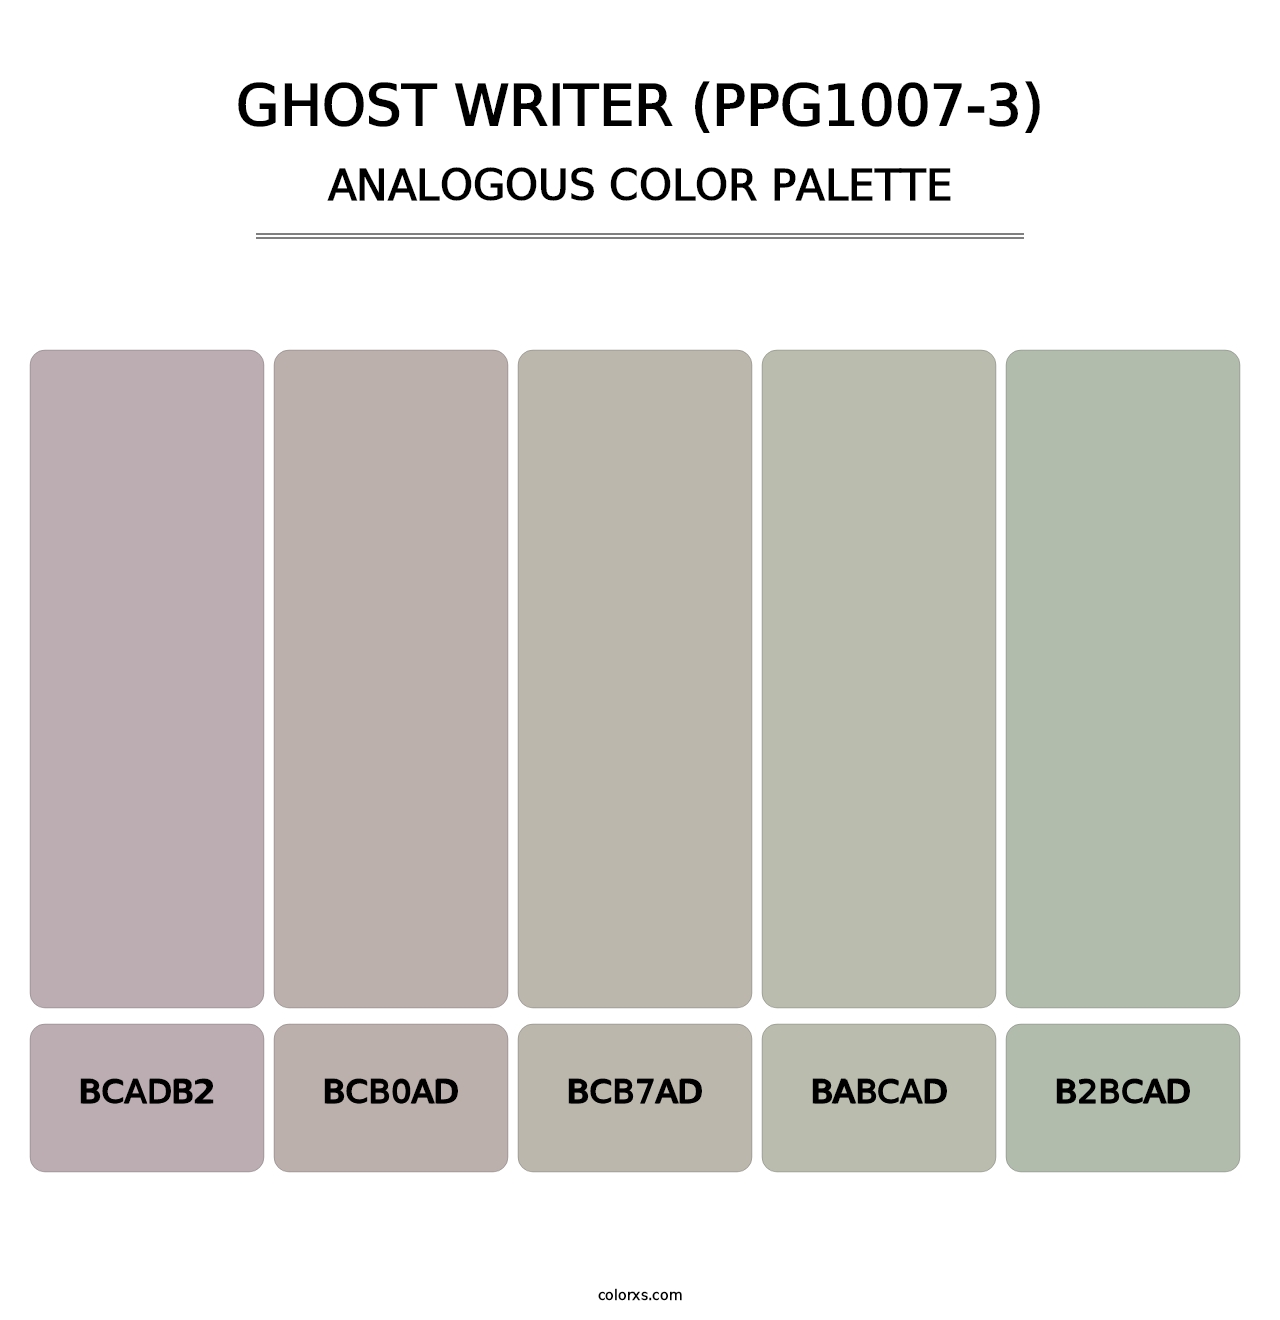 Ghost Writer (PPG1007-3) - Analogous Color Palette